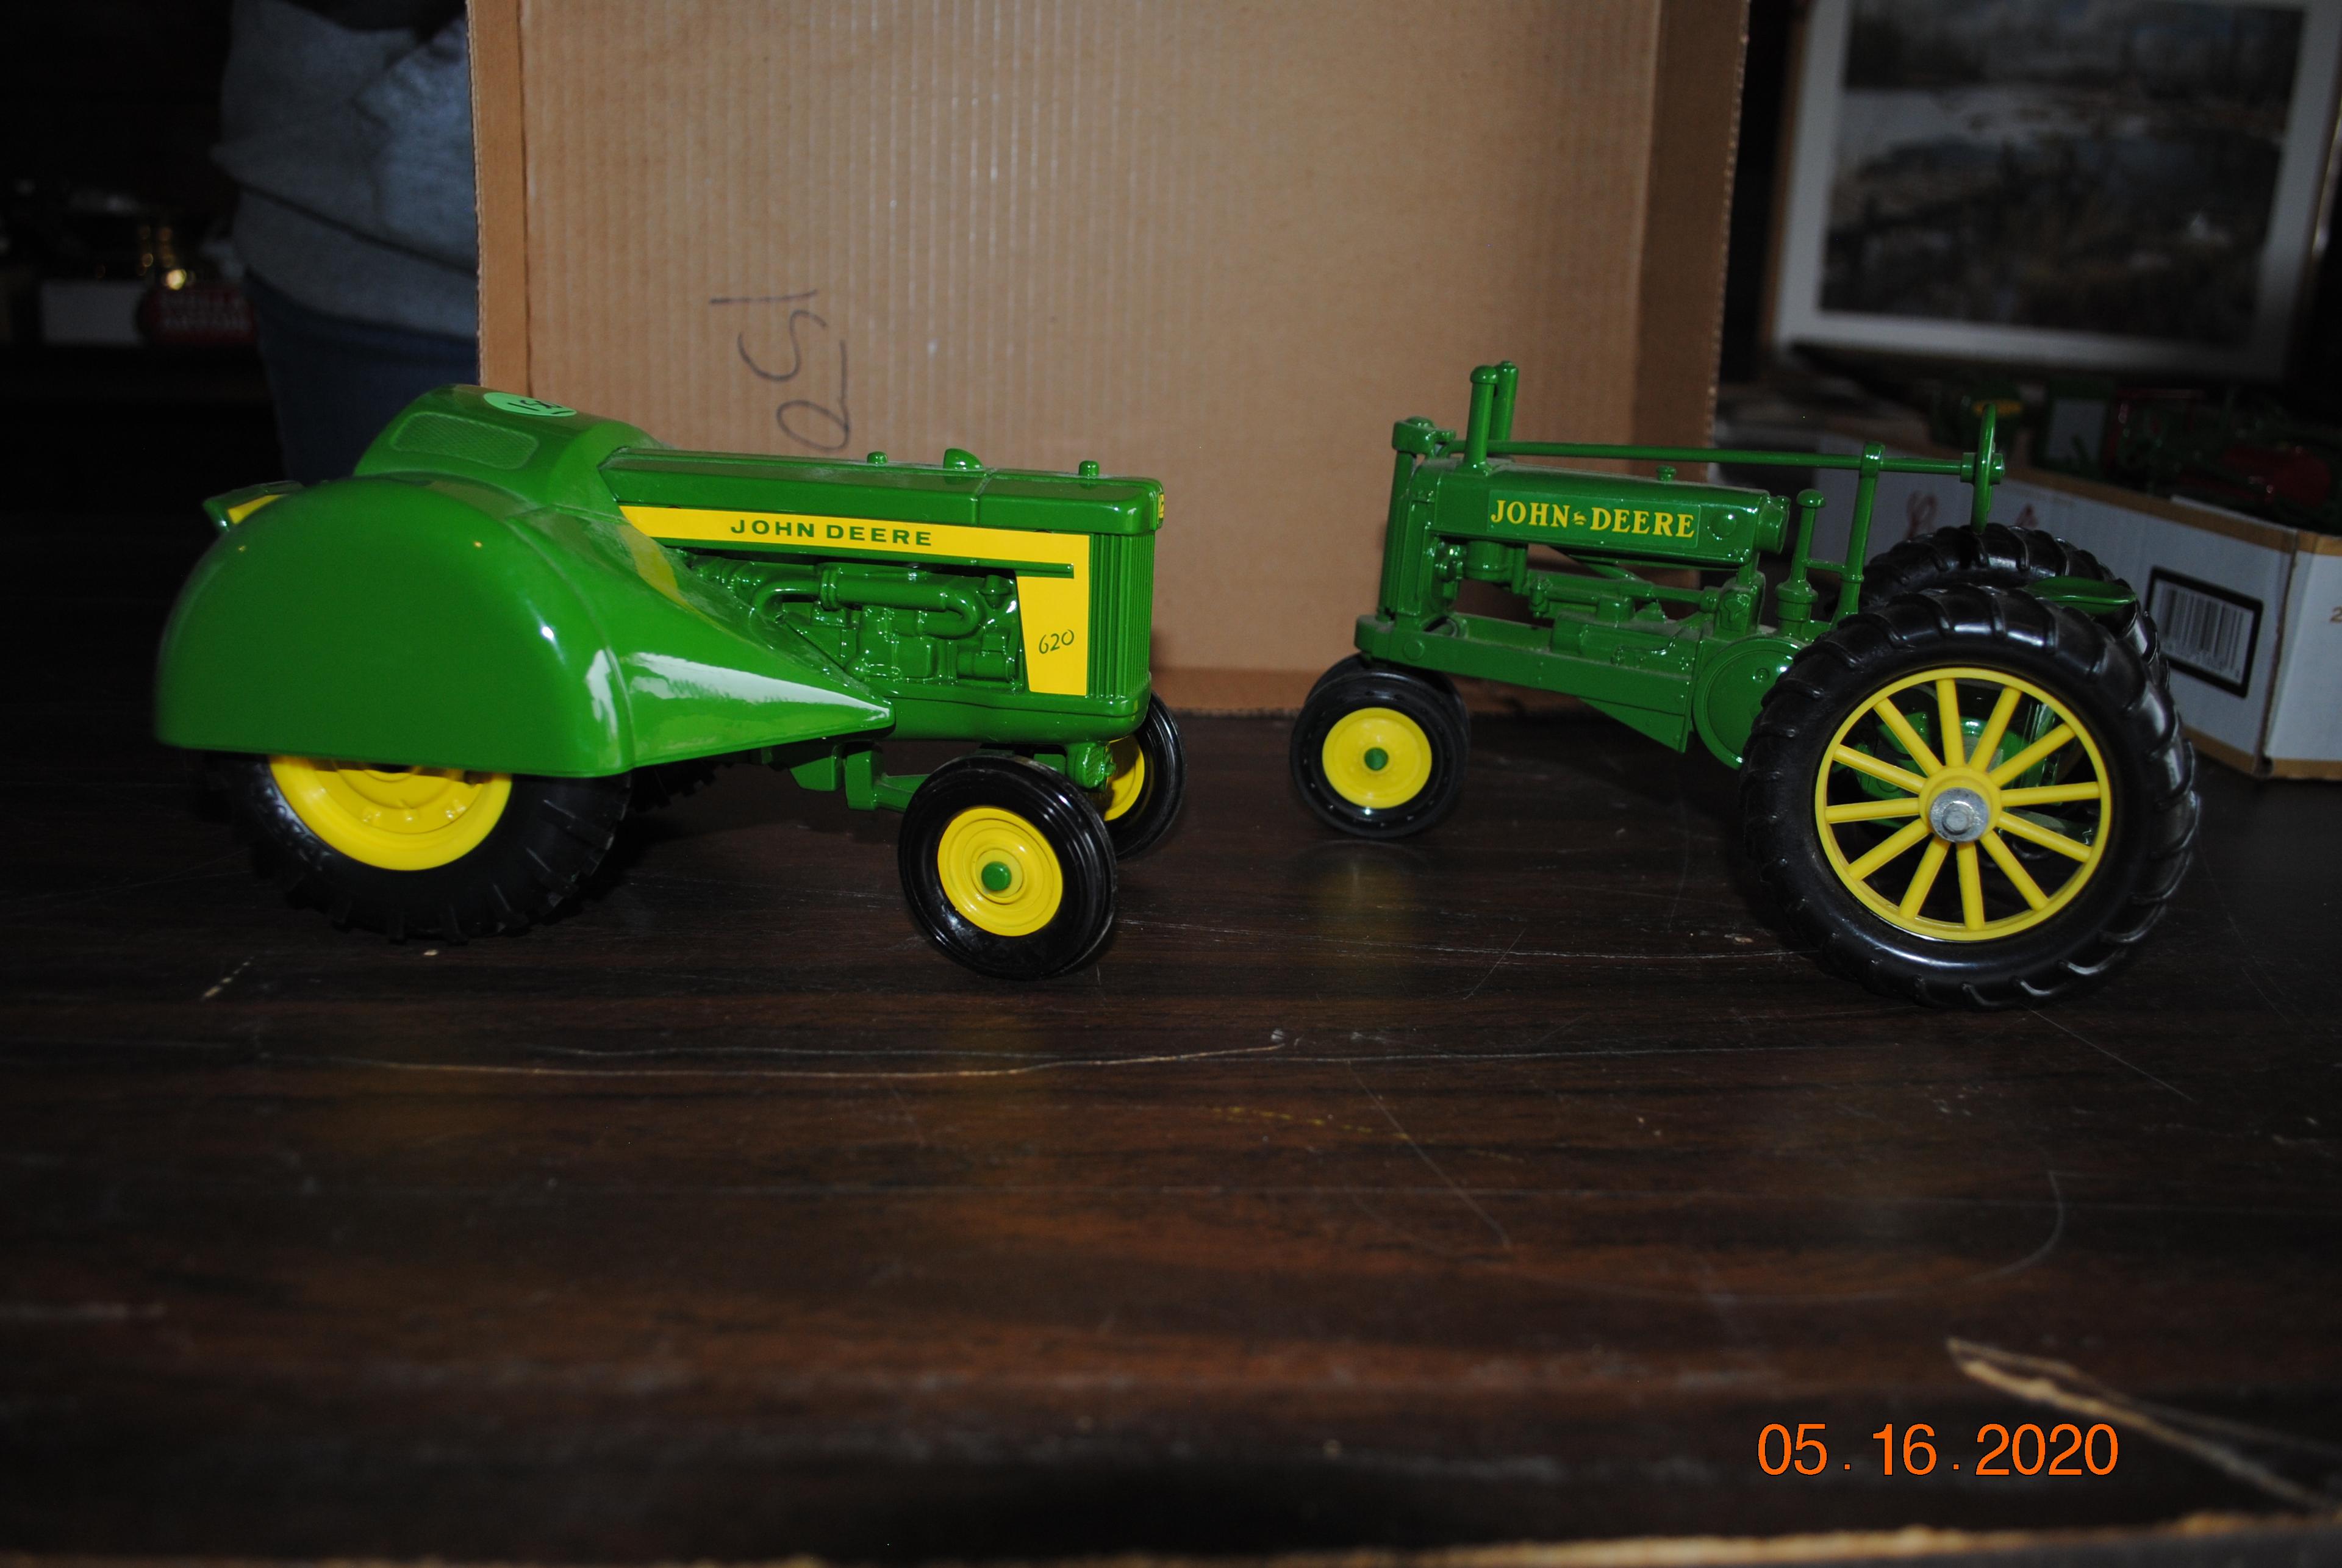 1/16 John Deere 620 Orchard tractor, 2-cylinder Club Expo 1992, 1/16 John Deere 2-cylinder tractor